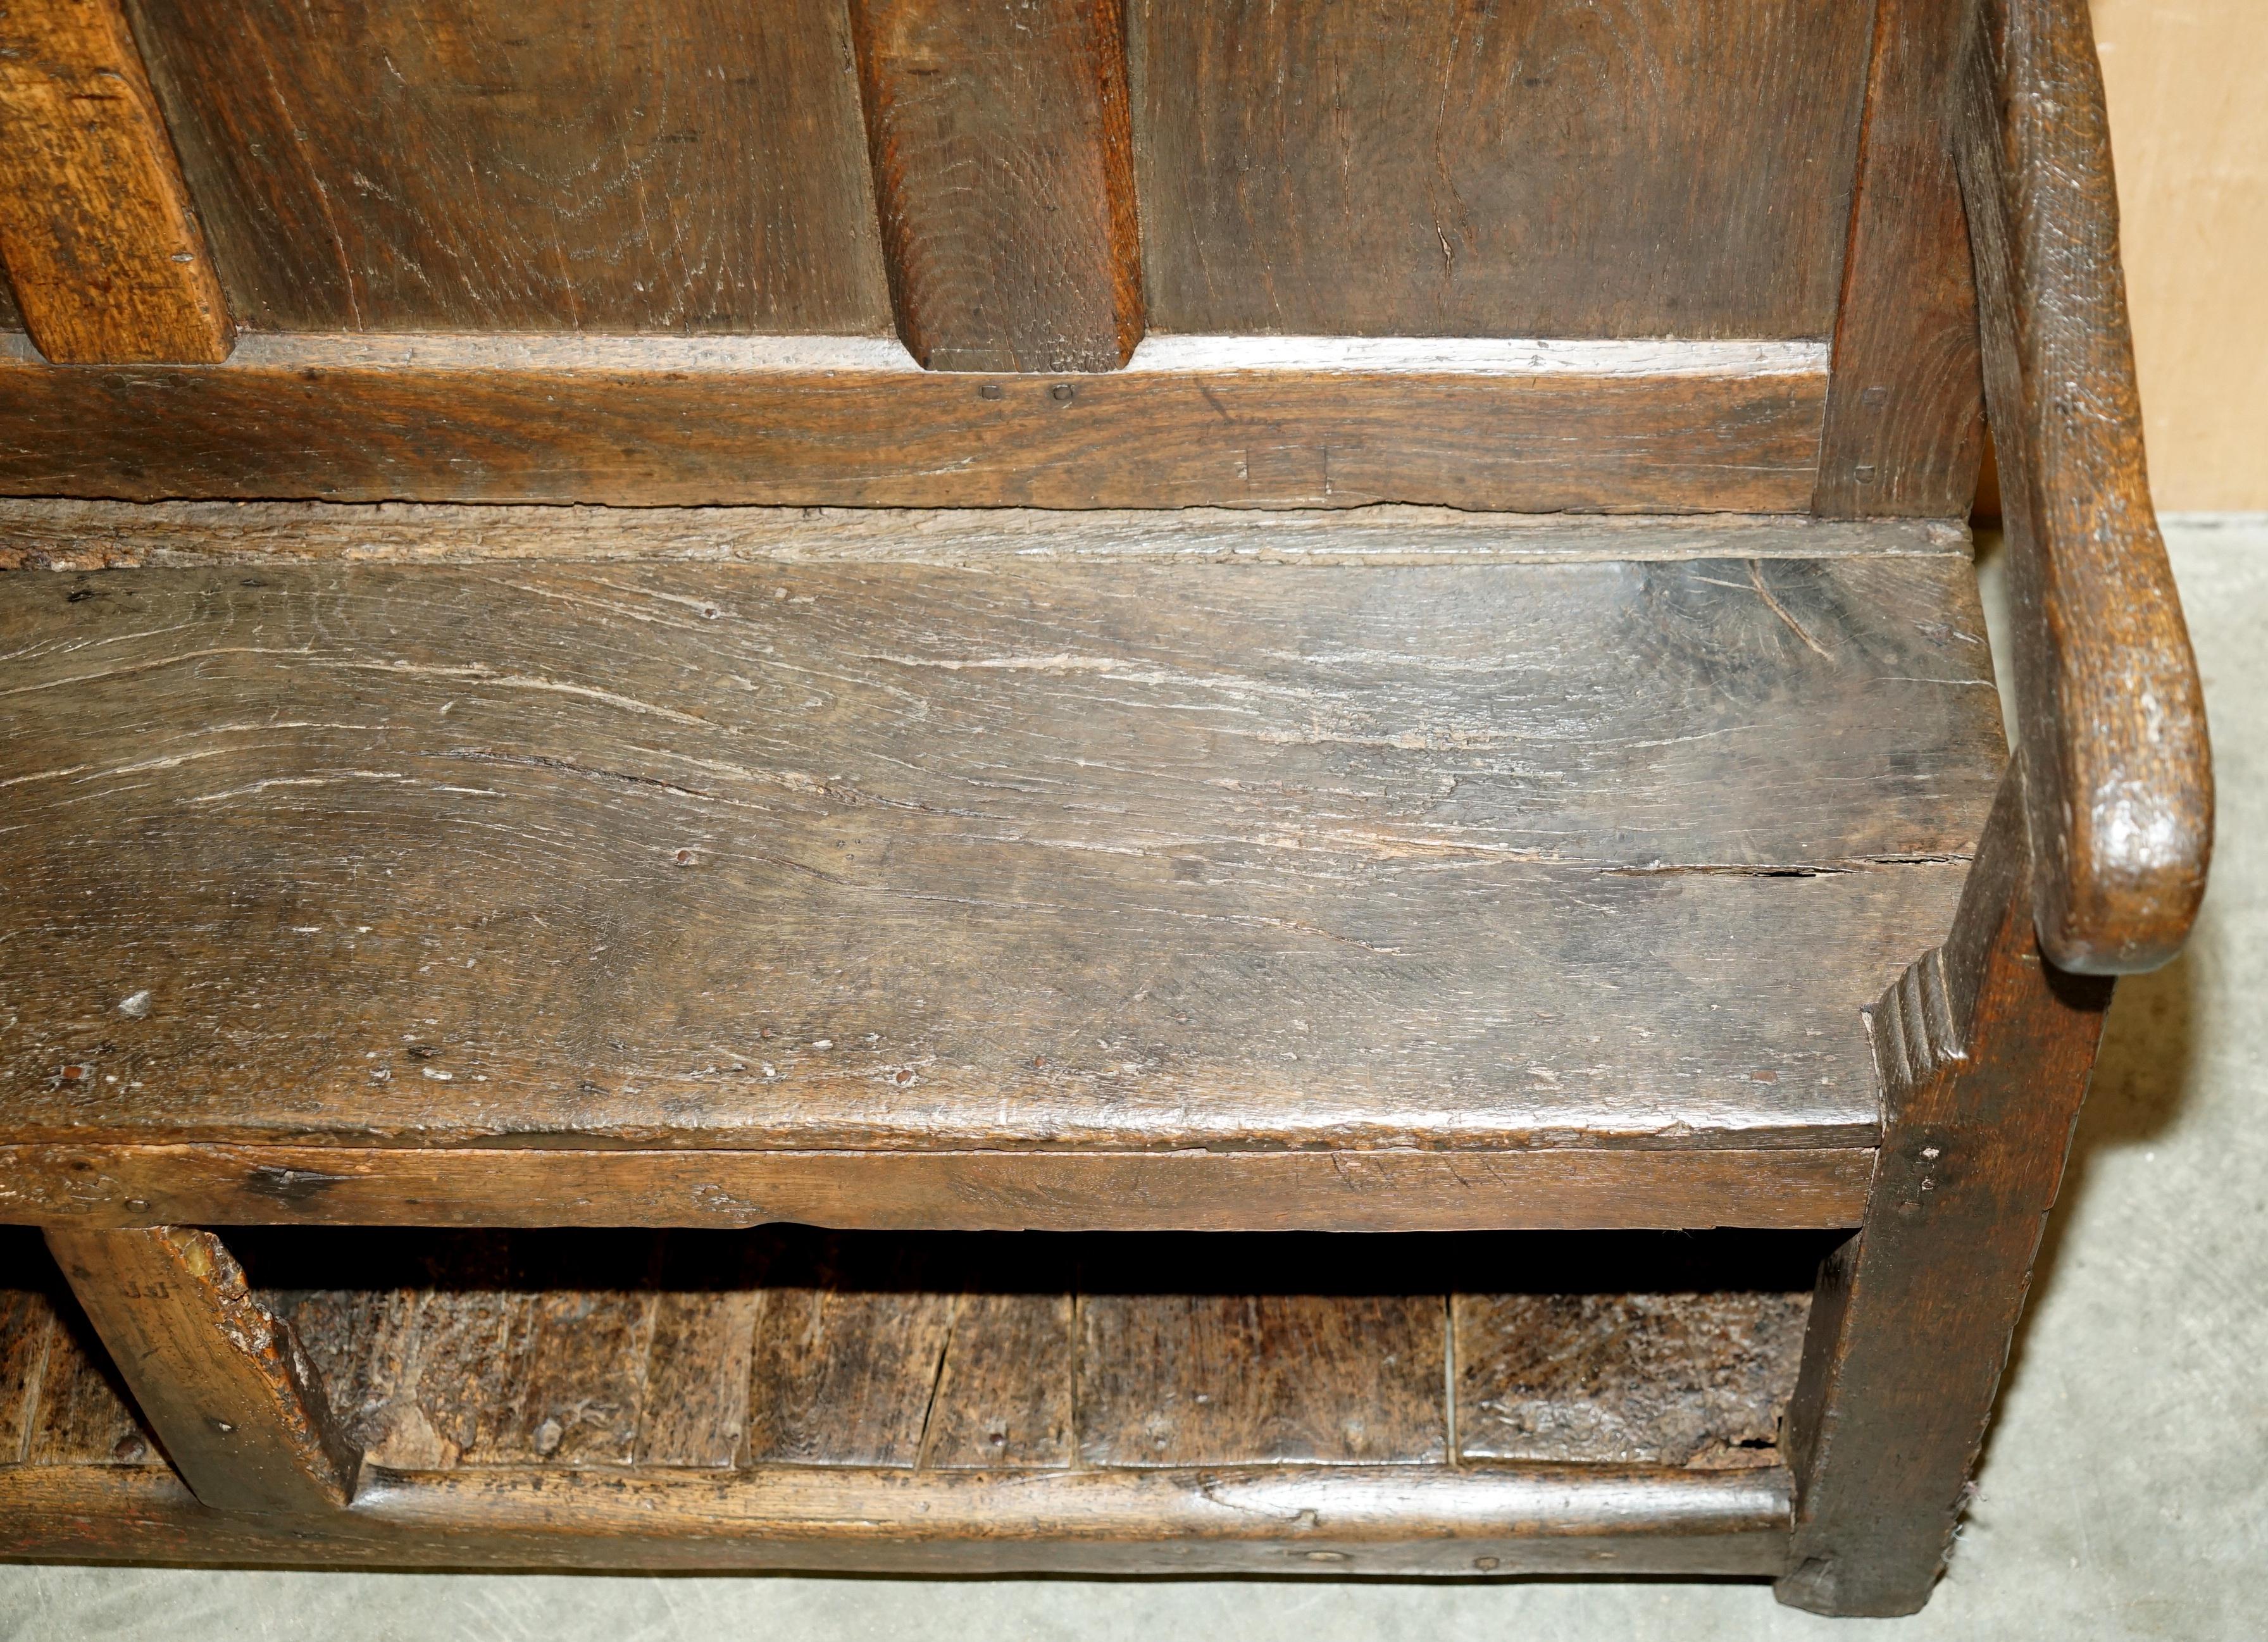 STUNNiNG 17TH CENTURY ANGLESEY WALES SETTLE BENCH LOVELY HALLWAY TAVERN SEATING im Angebot 6